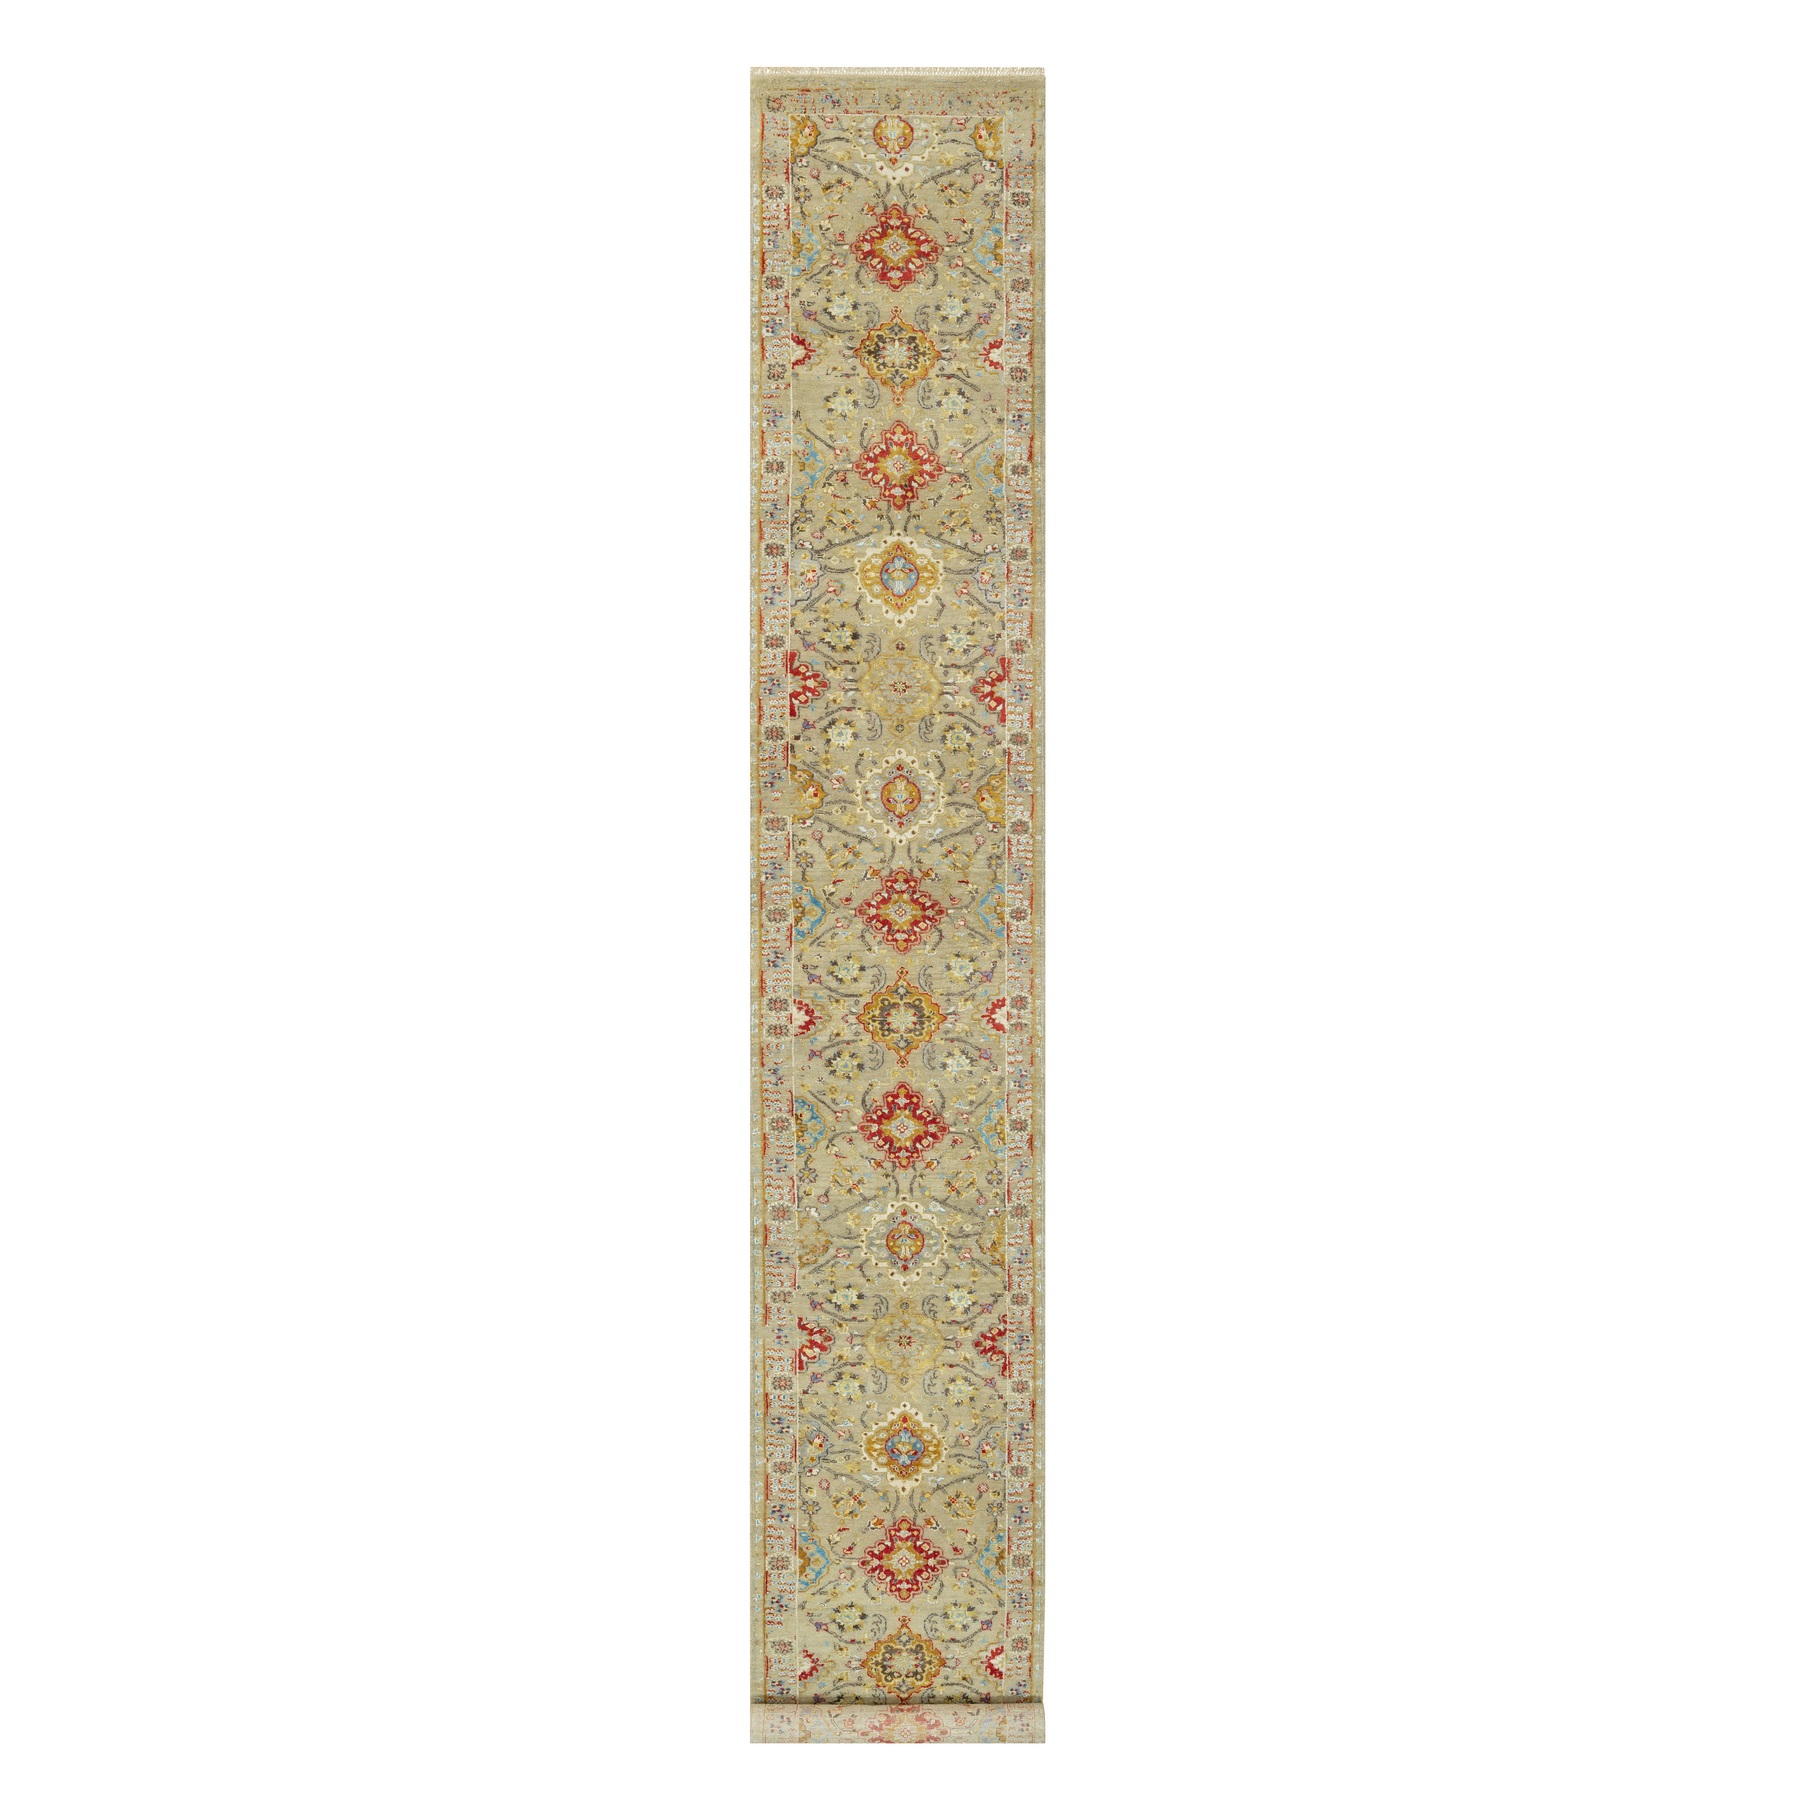 Transitional Rugs LUV814788